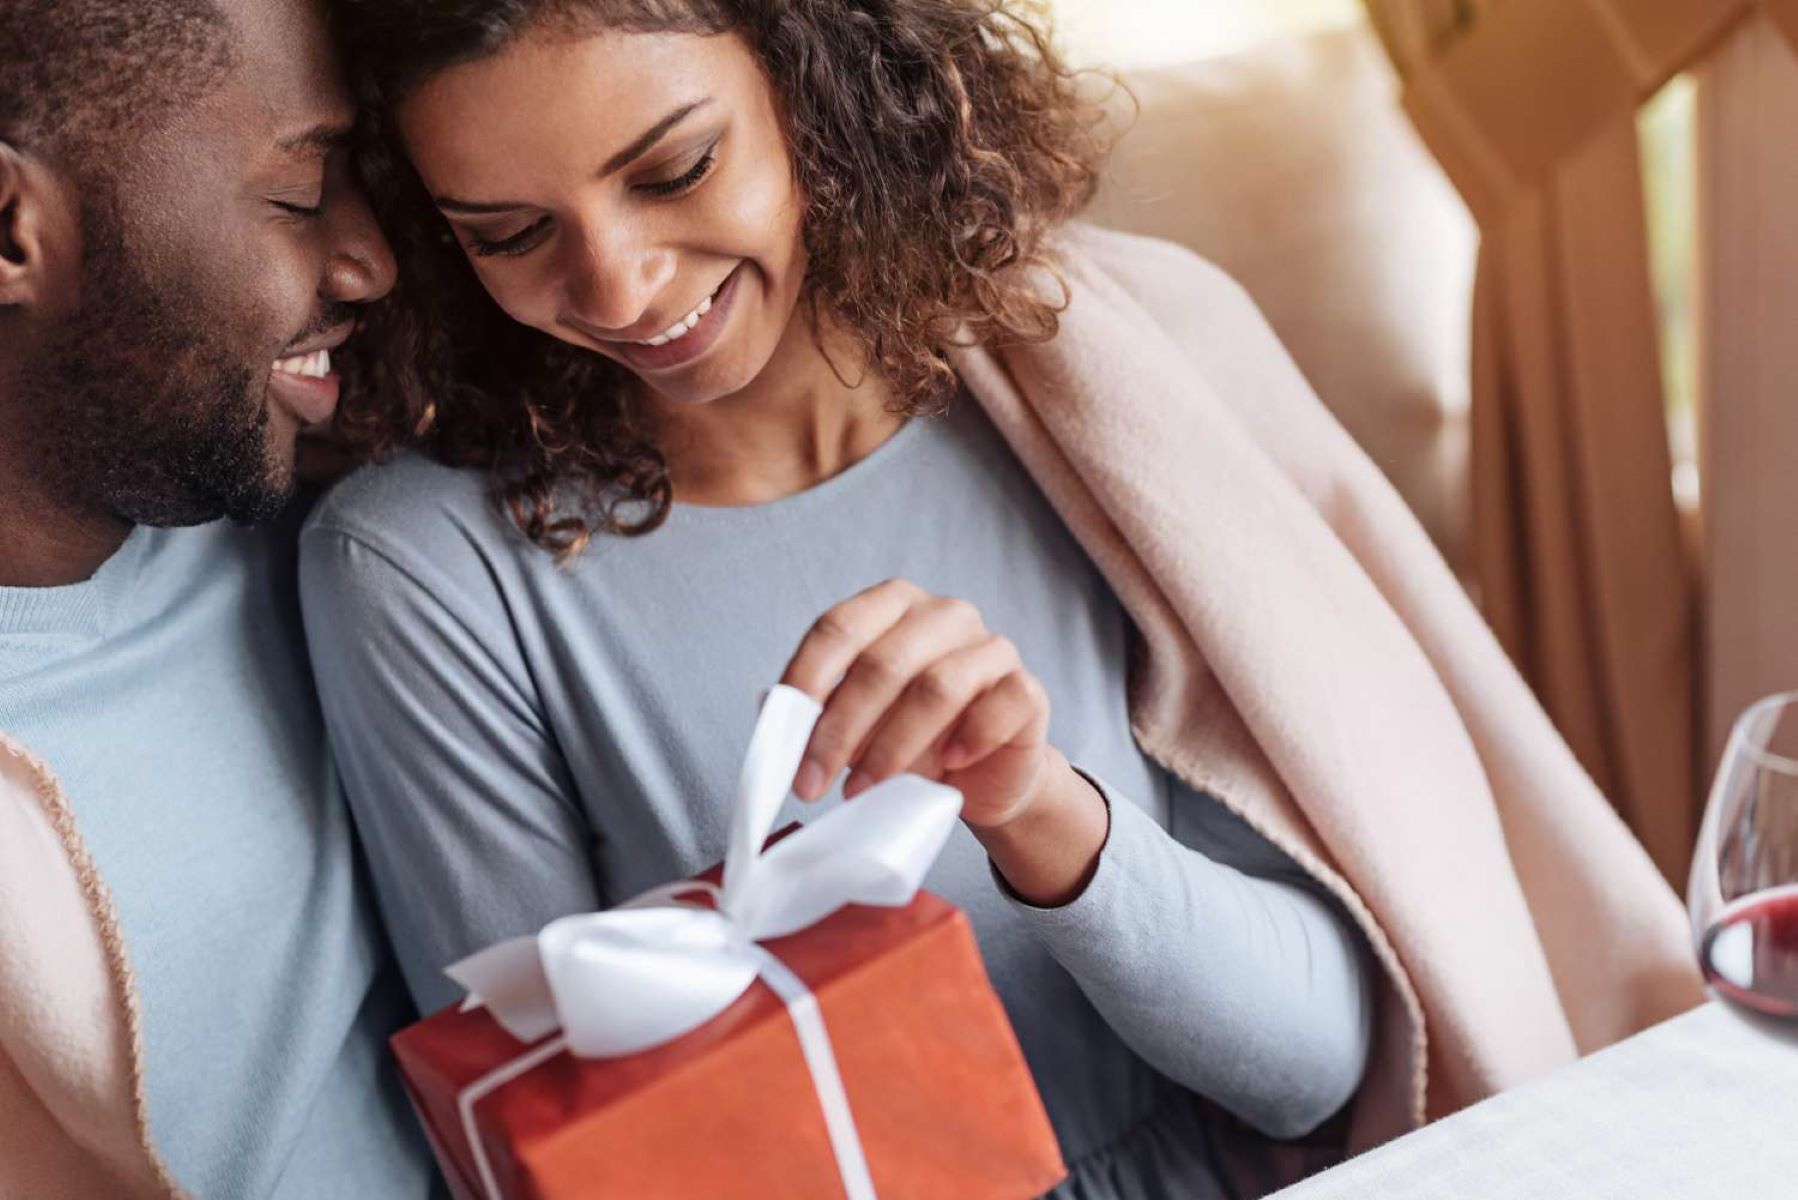 10 Romantic Anniversary Gifts For Your Wife